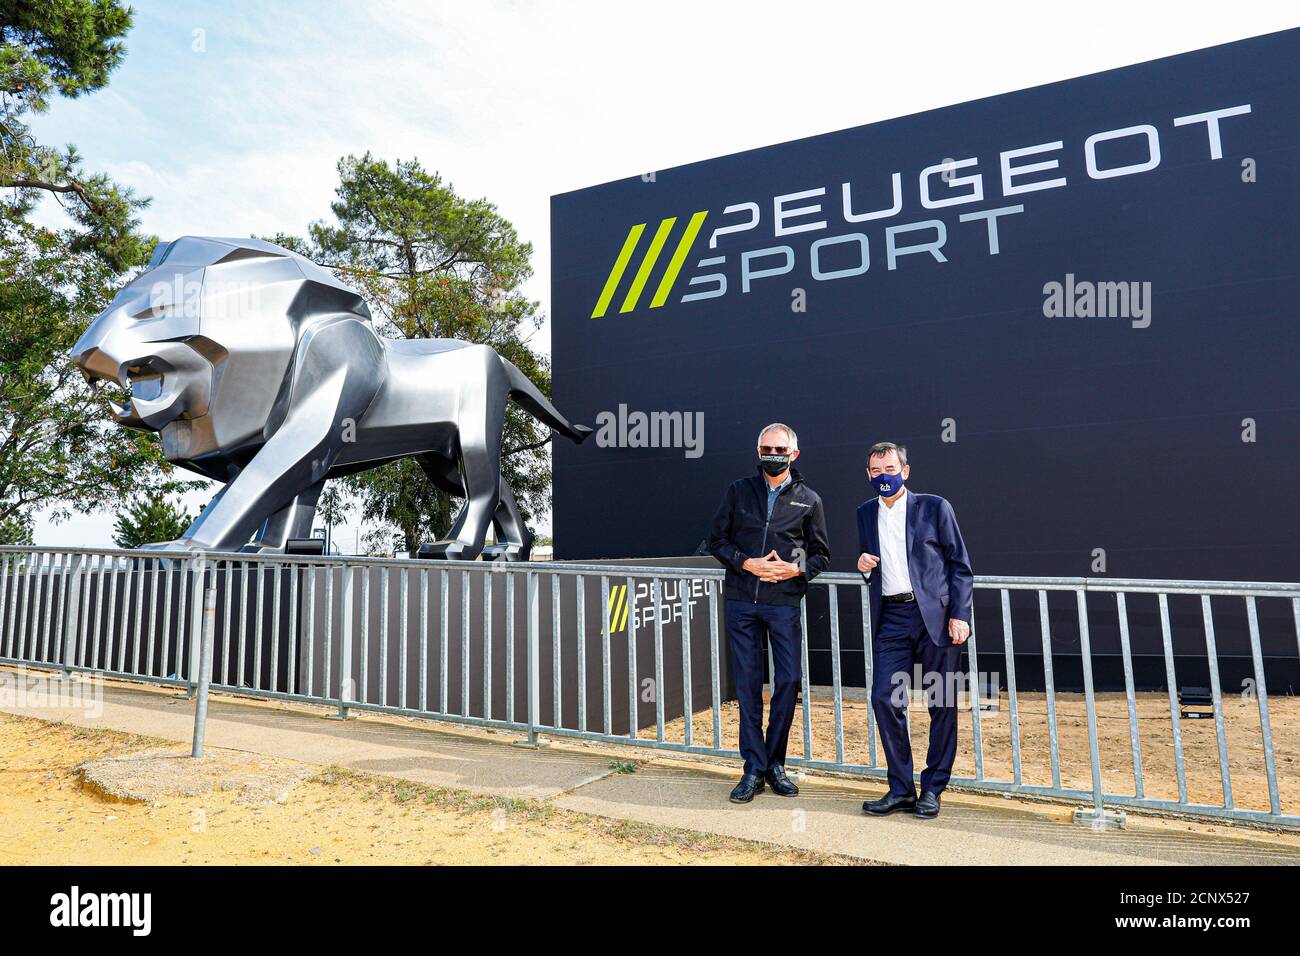 Le Mans, France. 18th Sep, 2020. Lion Peugeot Sport, TAVARES Carlos CEO groupe PSA, Fillon Pierre, President of the ACO during the qualifying and Hyperpole sessions of the 2020 24 Hours of Le Mans, 7th round of the 2019-20 FIA World Endurance Championship on the Circuit des 24 Heures du Mans, from September 16 to 20, 2020 in Le Mans, France - Photo Frederic Le Floc'h/DPPI Credit: LM/DPPI/Frederic Le Floc H/Alamy Live News Stock Photo